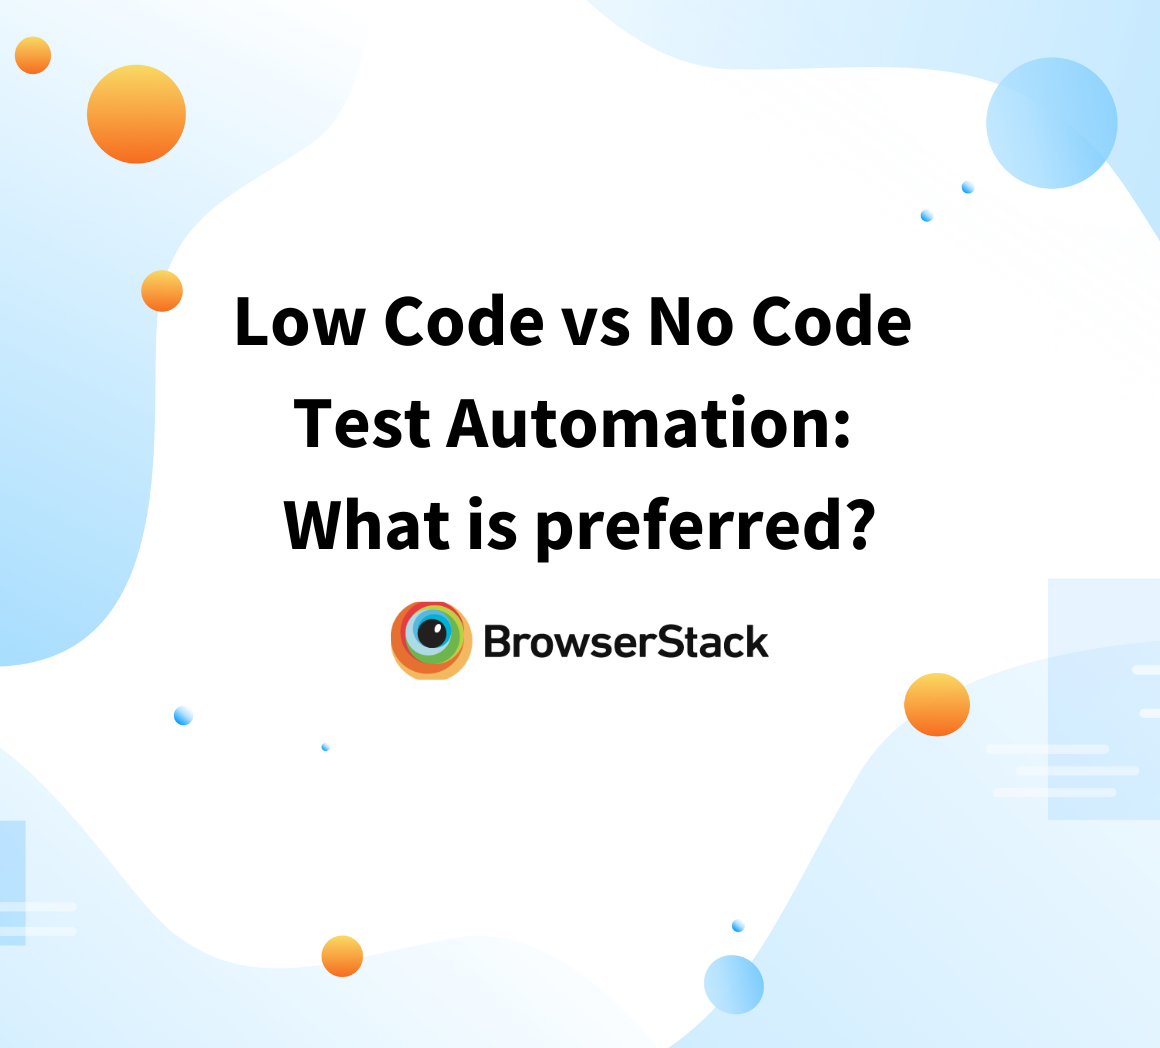 Low Code vs No Code Test Automation: What is preferred?